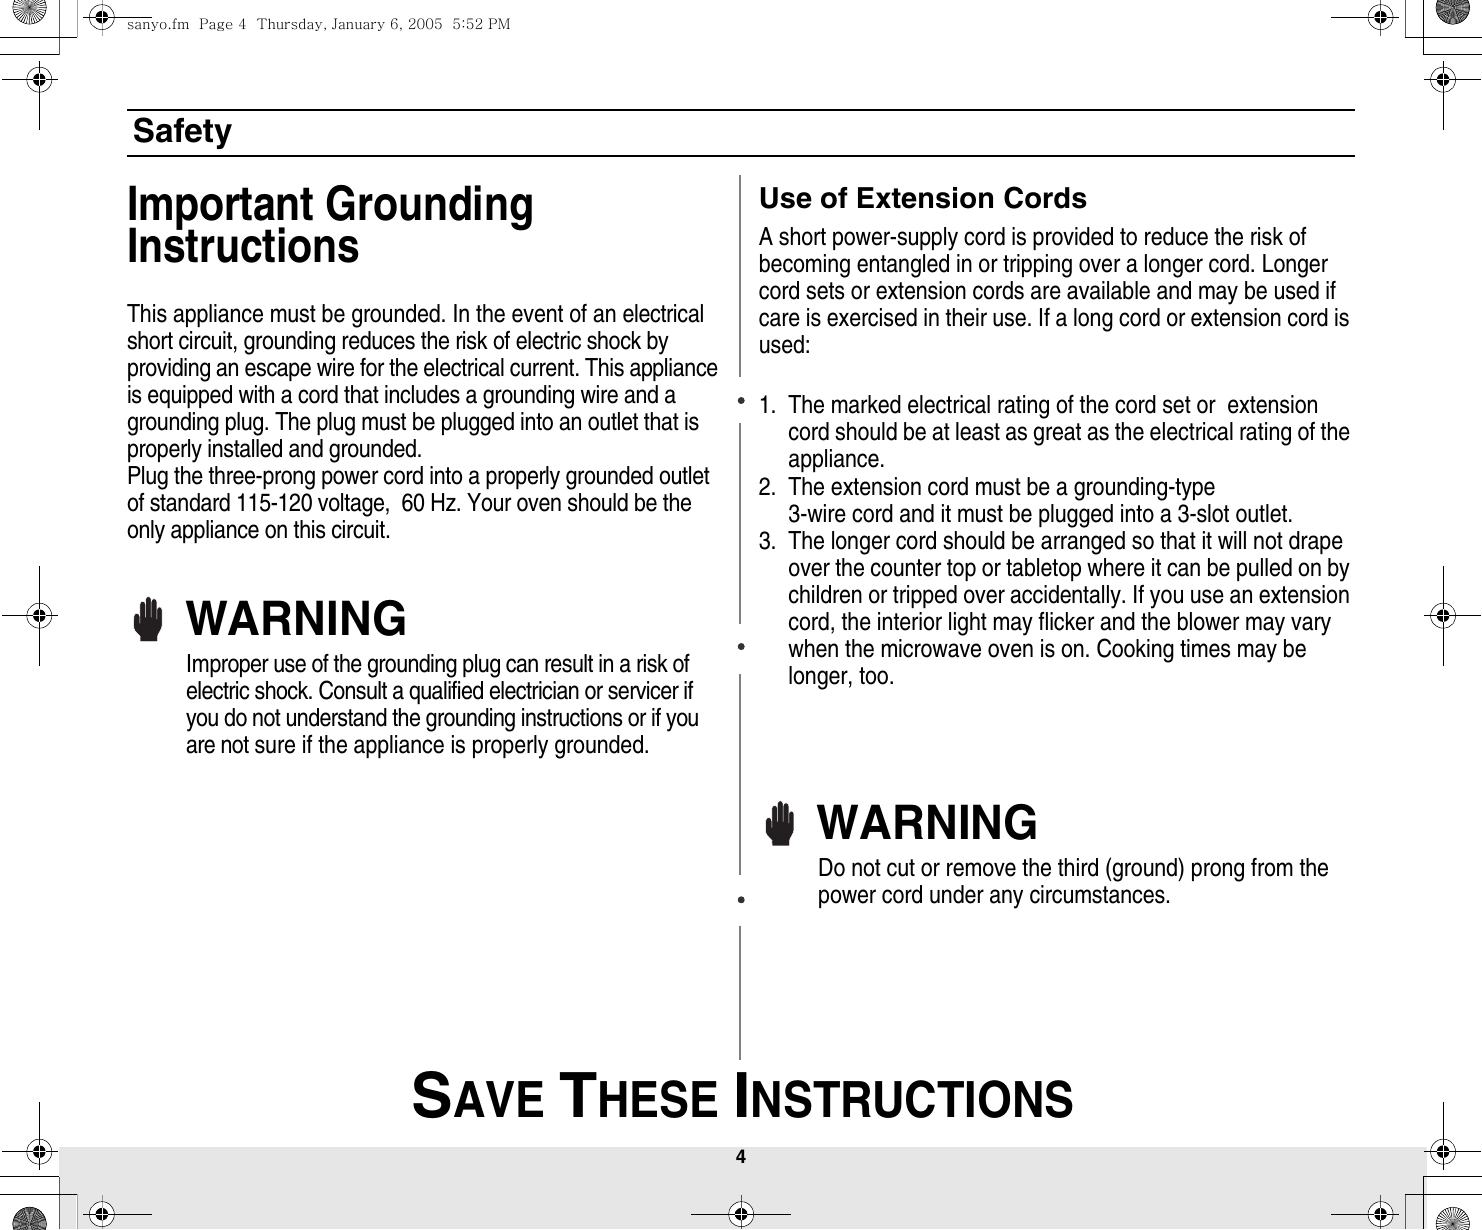 4 SAVE THESE INSTRUCTIONSSafetyImportant Grounding InstructionsThis appliance must be grounded. In the event of an electrical short circuit, grounding reduces the risk of electric shock by providing an escape wire for the electrical current. This appliance is equipped with a cord that includes a grounding wire and a grounding plug. The plug must be plugged into an outlet that is properly installed and grounded.Plug the three-prong power cord into a properly grounded outlet of standard 115-120 voltage,  60 Hz. Your oven should be the only appliance on this circuit.WARNINGImproper use of the grounding plug can result in a risk of electric shock. Consult a qualified electrician or servicer if you do not understand the grounding instructions or if you are not sure if the appliance is properly grounded.Use of Extension CordsA short power-supply cord is provided to reduce the risk of becoming entangled in or tripping over a longer cord. Longer cord sets or extension cords are available and may be used if care is exercised in their use. If a long cord or extension cord is used:1. The marked electrical rating of the cord set or  extension cord should be at least as great as the electrical rating of the appliance.2. The extension cord must be a grounding-type3-wire cord and it must be plugged into a 3-slot outlet. 3. The longer cord should be arranged so that it will not drape over the counter top or tabletop where it can be pulled on by children or tripped over accidentally. If you use an extension cord, the interior light may flicker and the blower may vary when the microwave oven is on. Cooking times may be longer, too.WARNINGDo not cut or remove the third (ground) prong from the power cord under any circumstances.sanyo.fm  Page 4  Thursday, January 6, 2005  5:52 PM